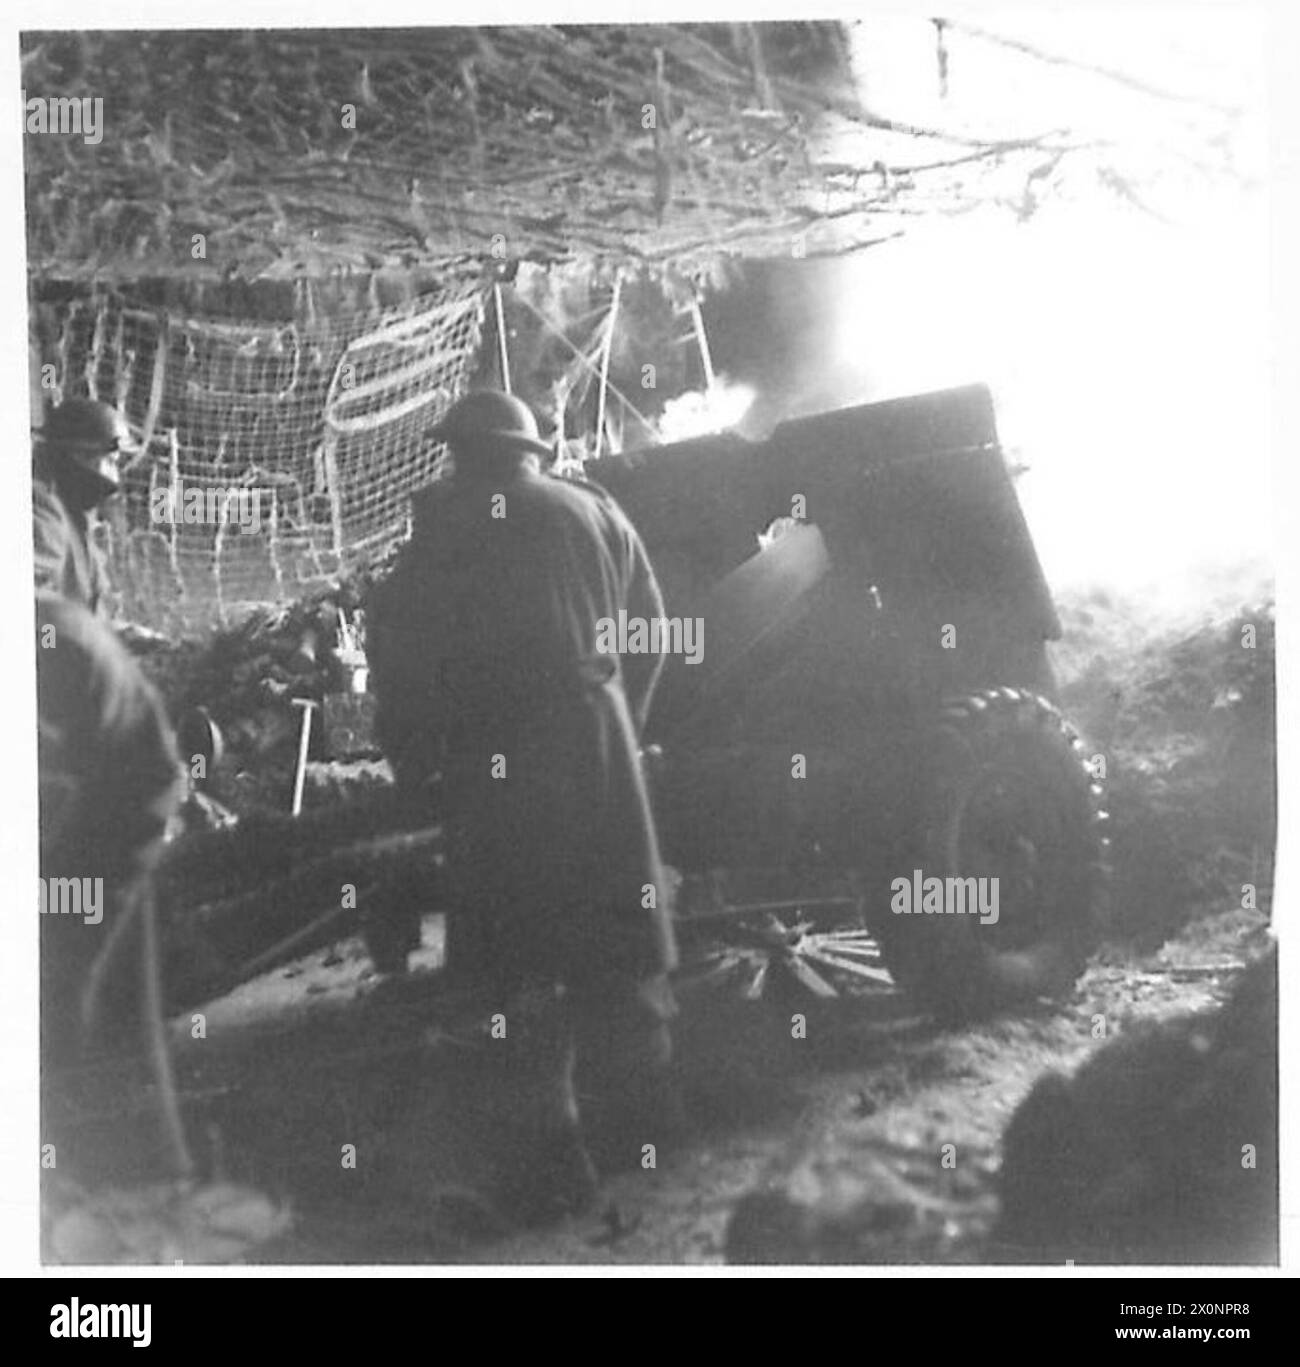 ITALY : EIGHTH ARMY : NEWFOUNDLAND GUNNERS IN ITALY - 'Q' Battery's guns in action at night. Photographic negative , British Army Stock Photo